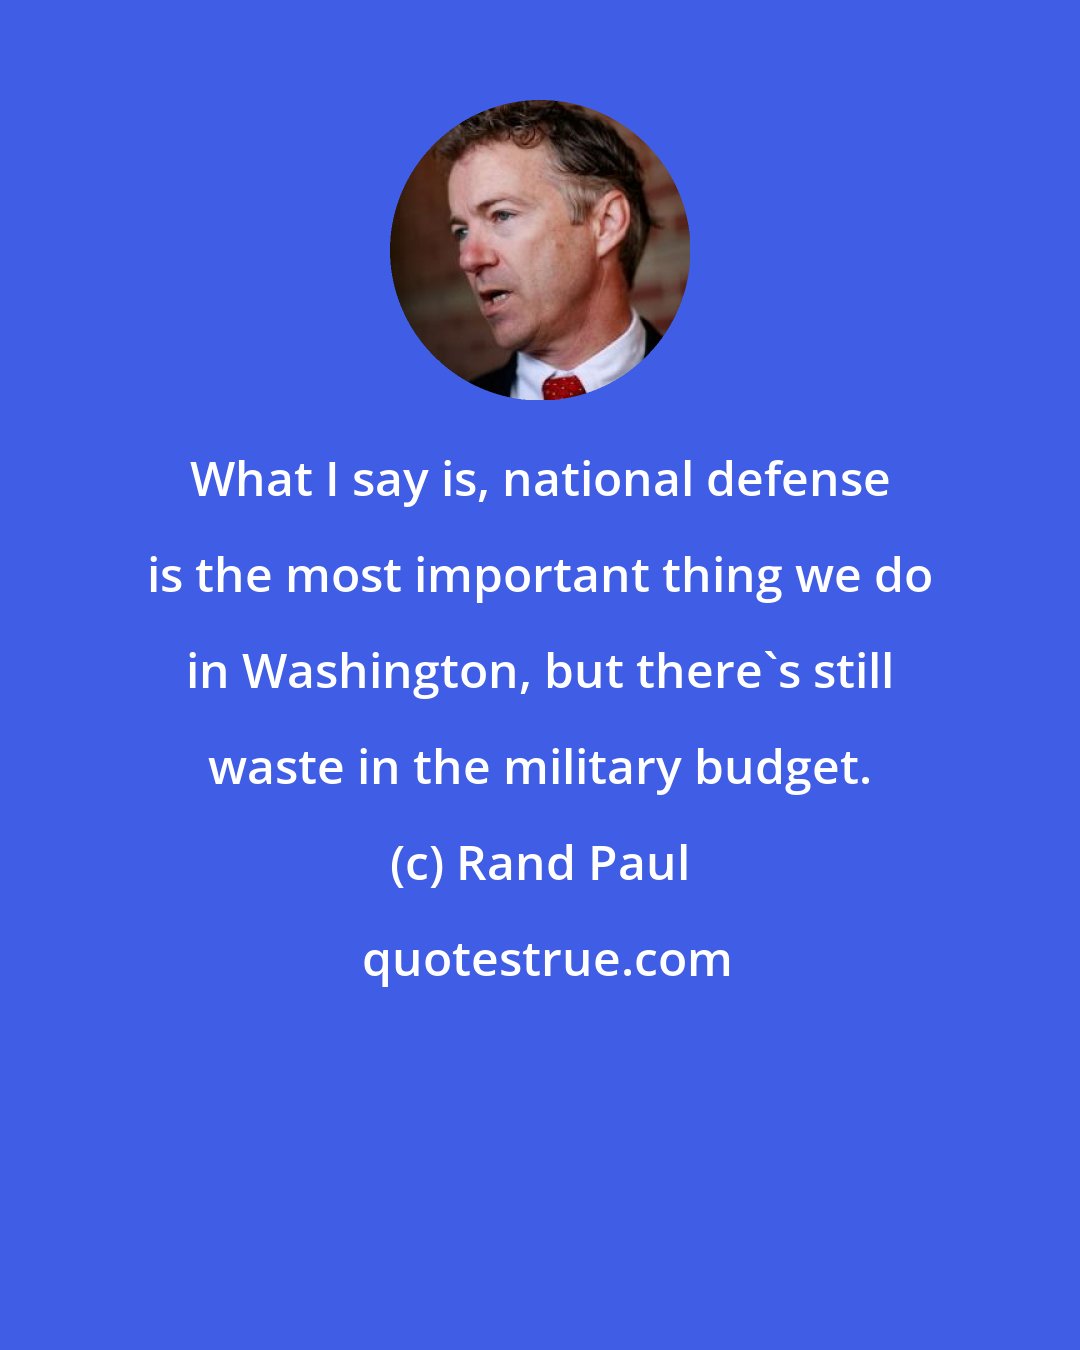 Rand Paul: What I say is, national defense is the most important thing we do in Washington, but there's still waste in the military budget.